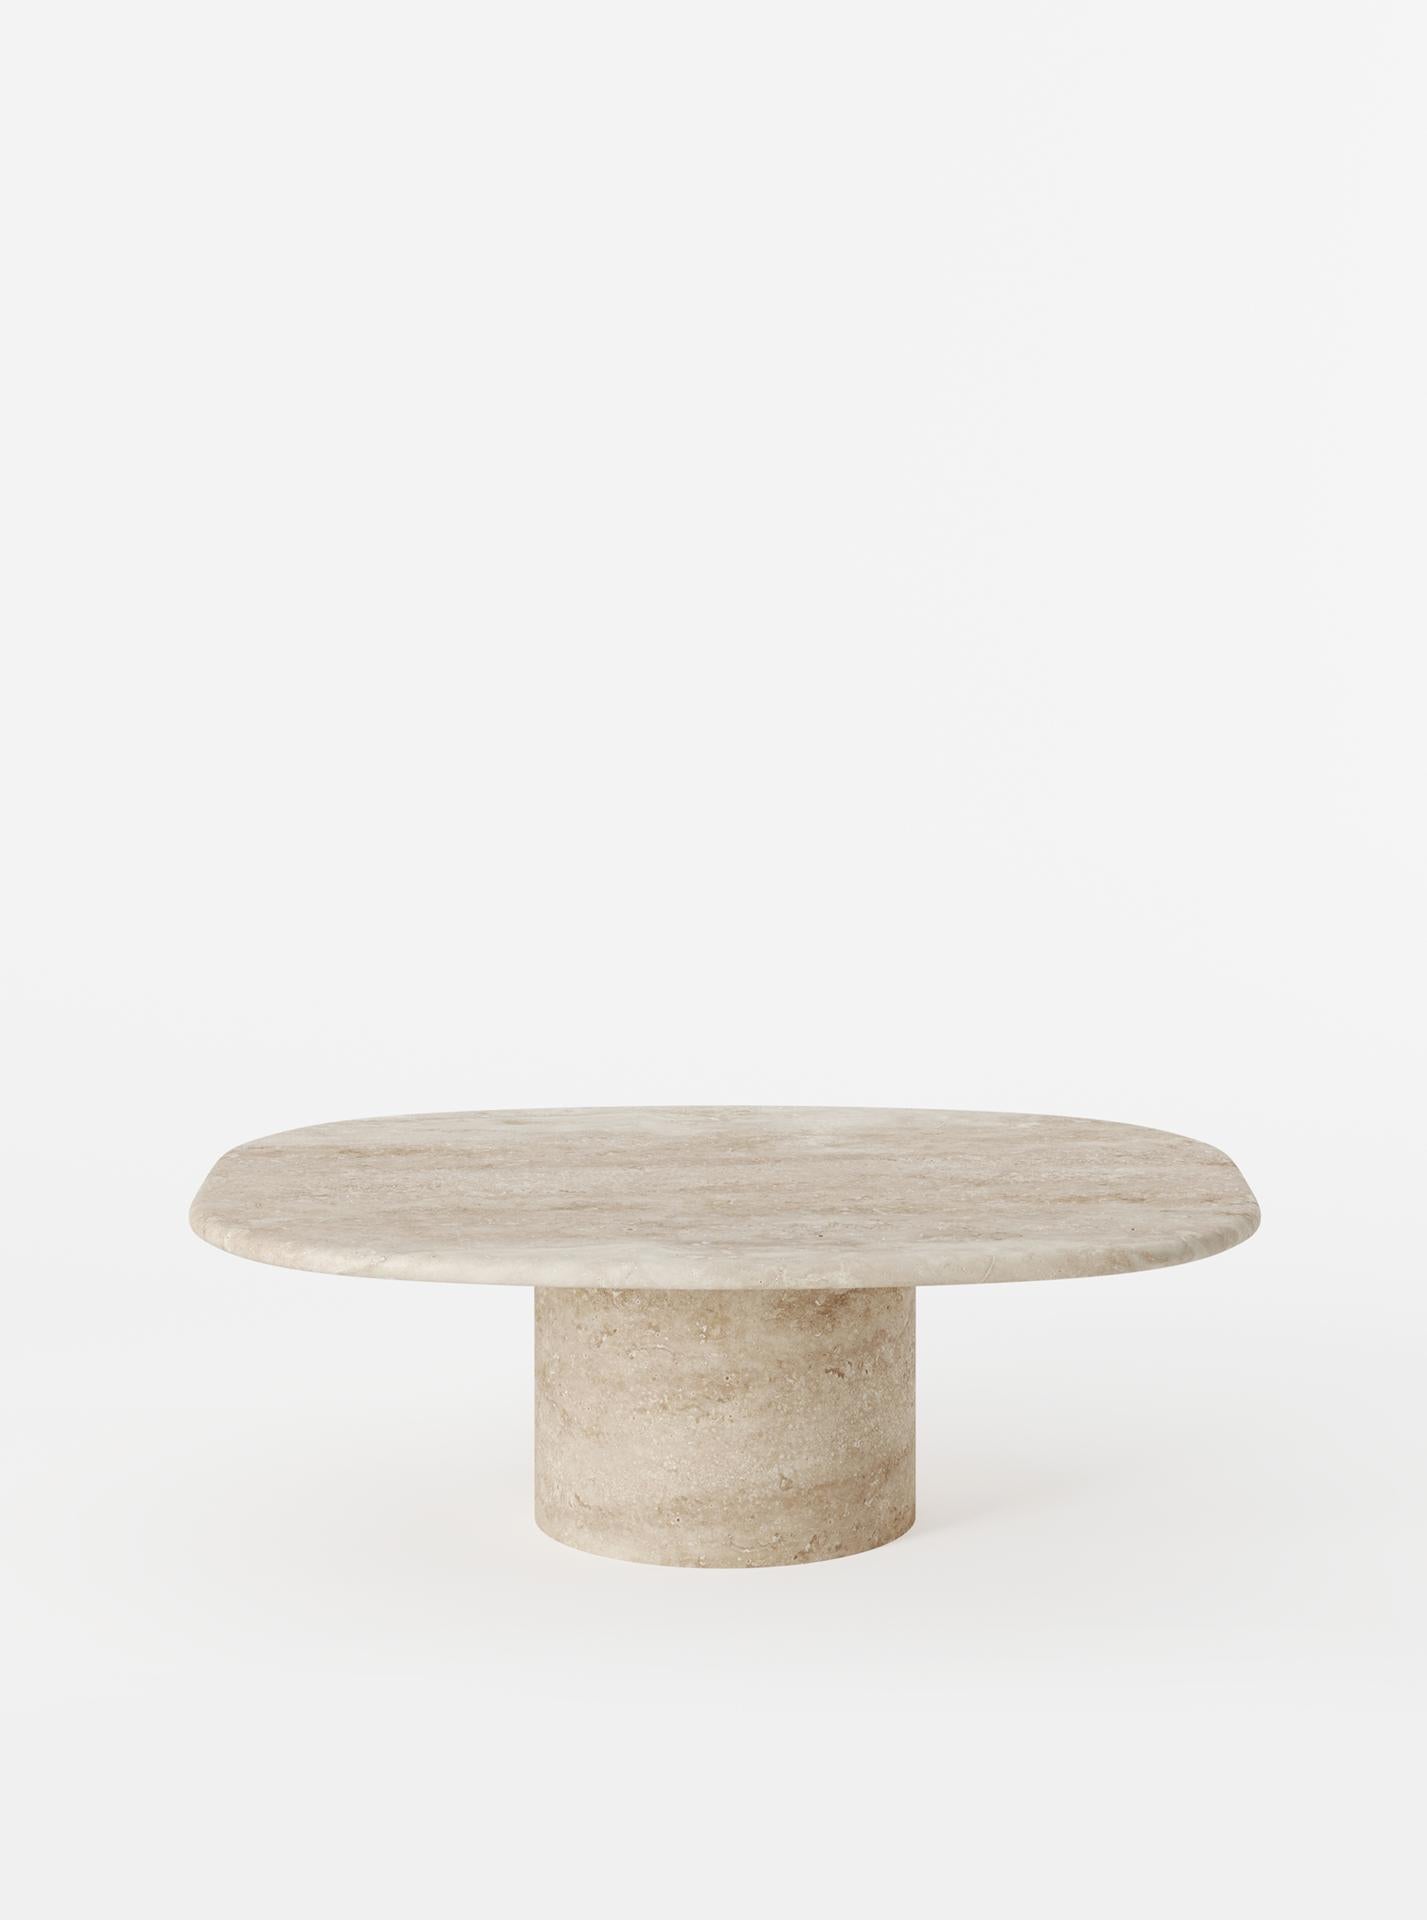 Minimalist Circa Coffee Table made in Italy in Travertine. Designed by Yaniv Chen For Sale